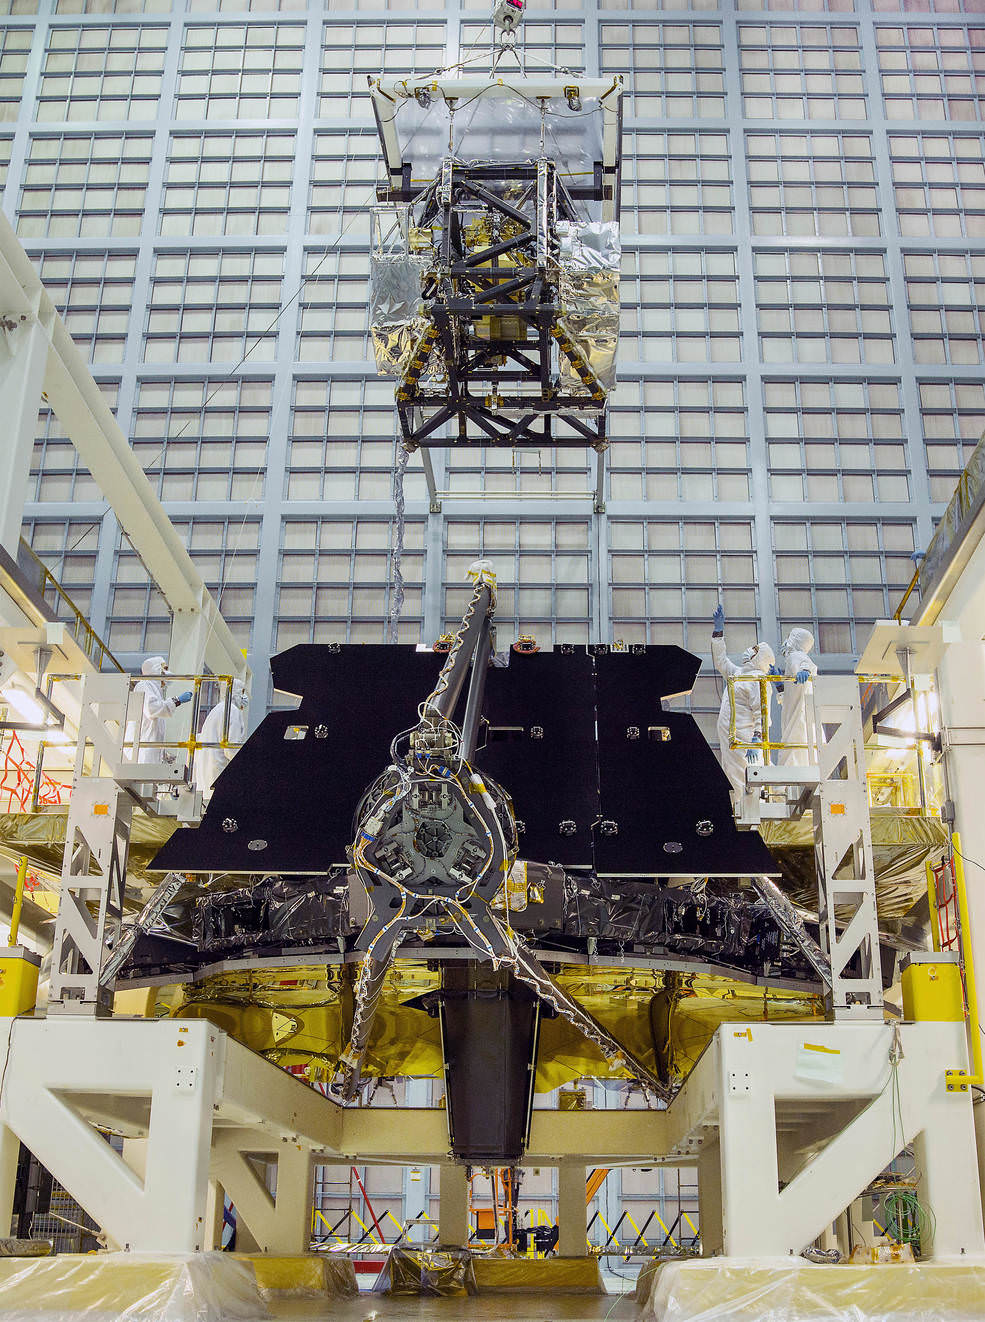 In this rare view, the James Webb Space Telescope team crane lifted the science instrument package for installation into the telescope structure.  Credits: NASA/Chris Gunn